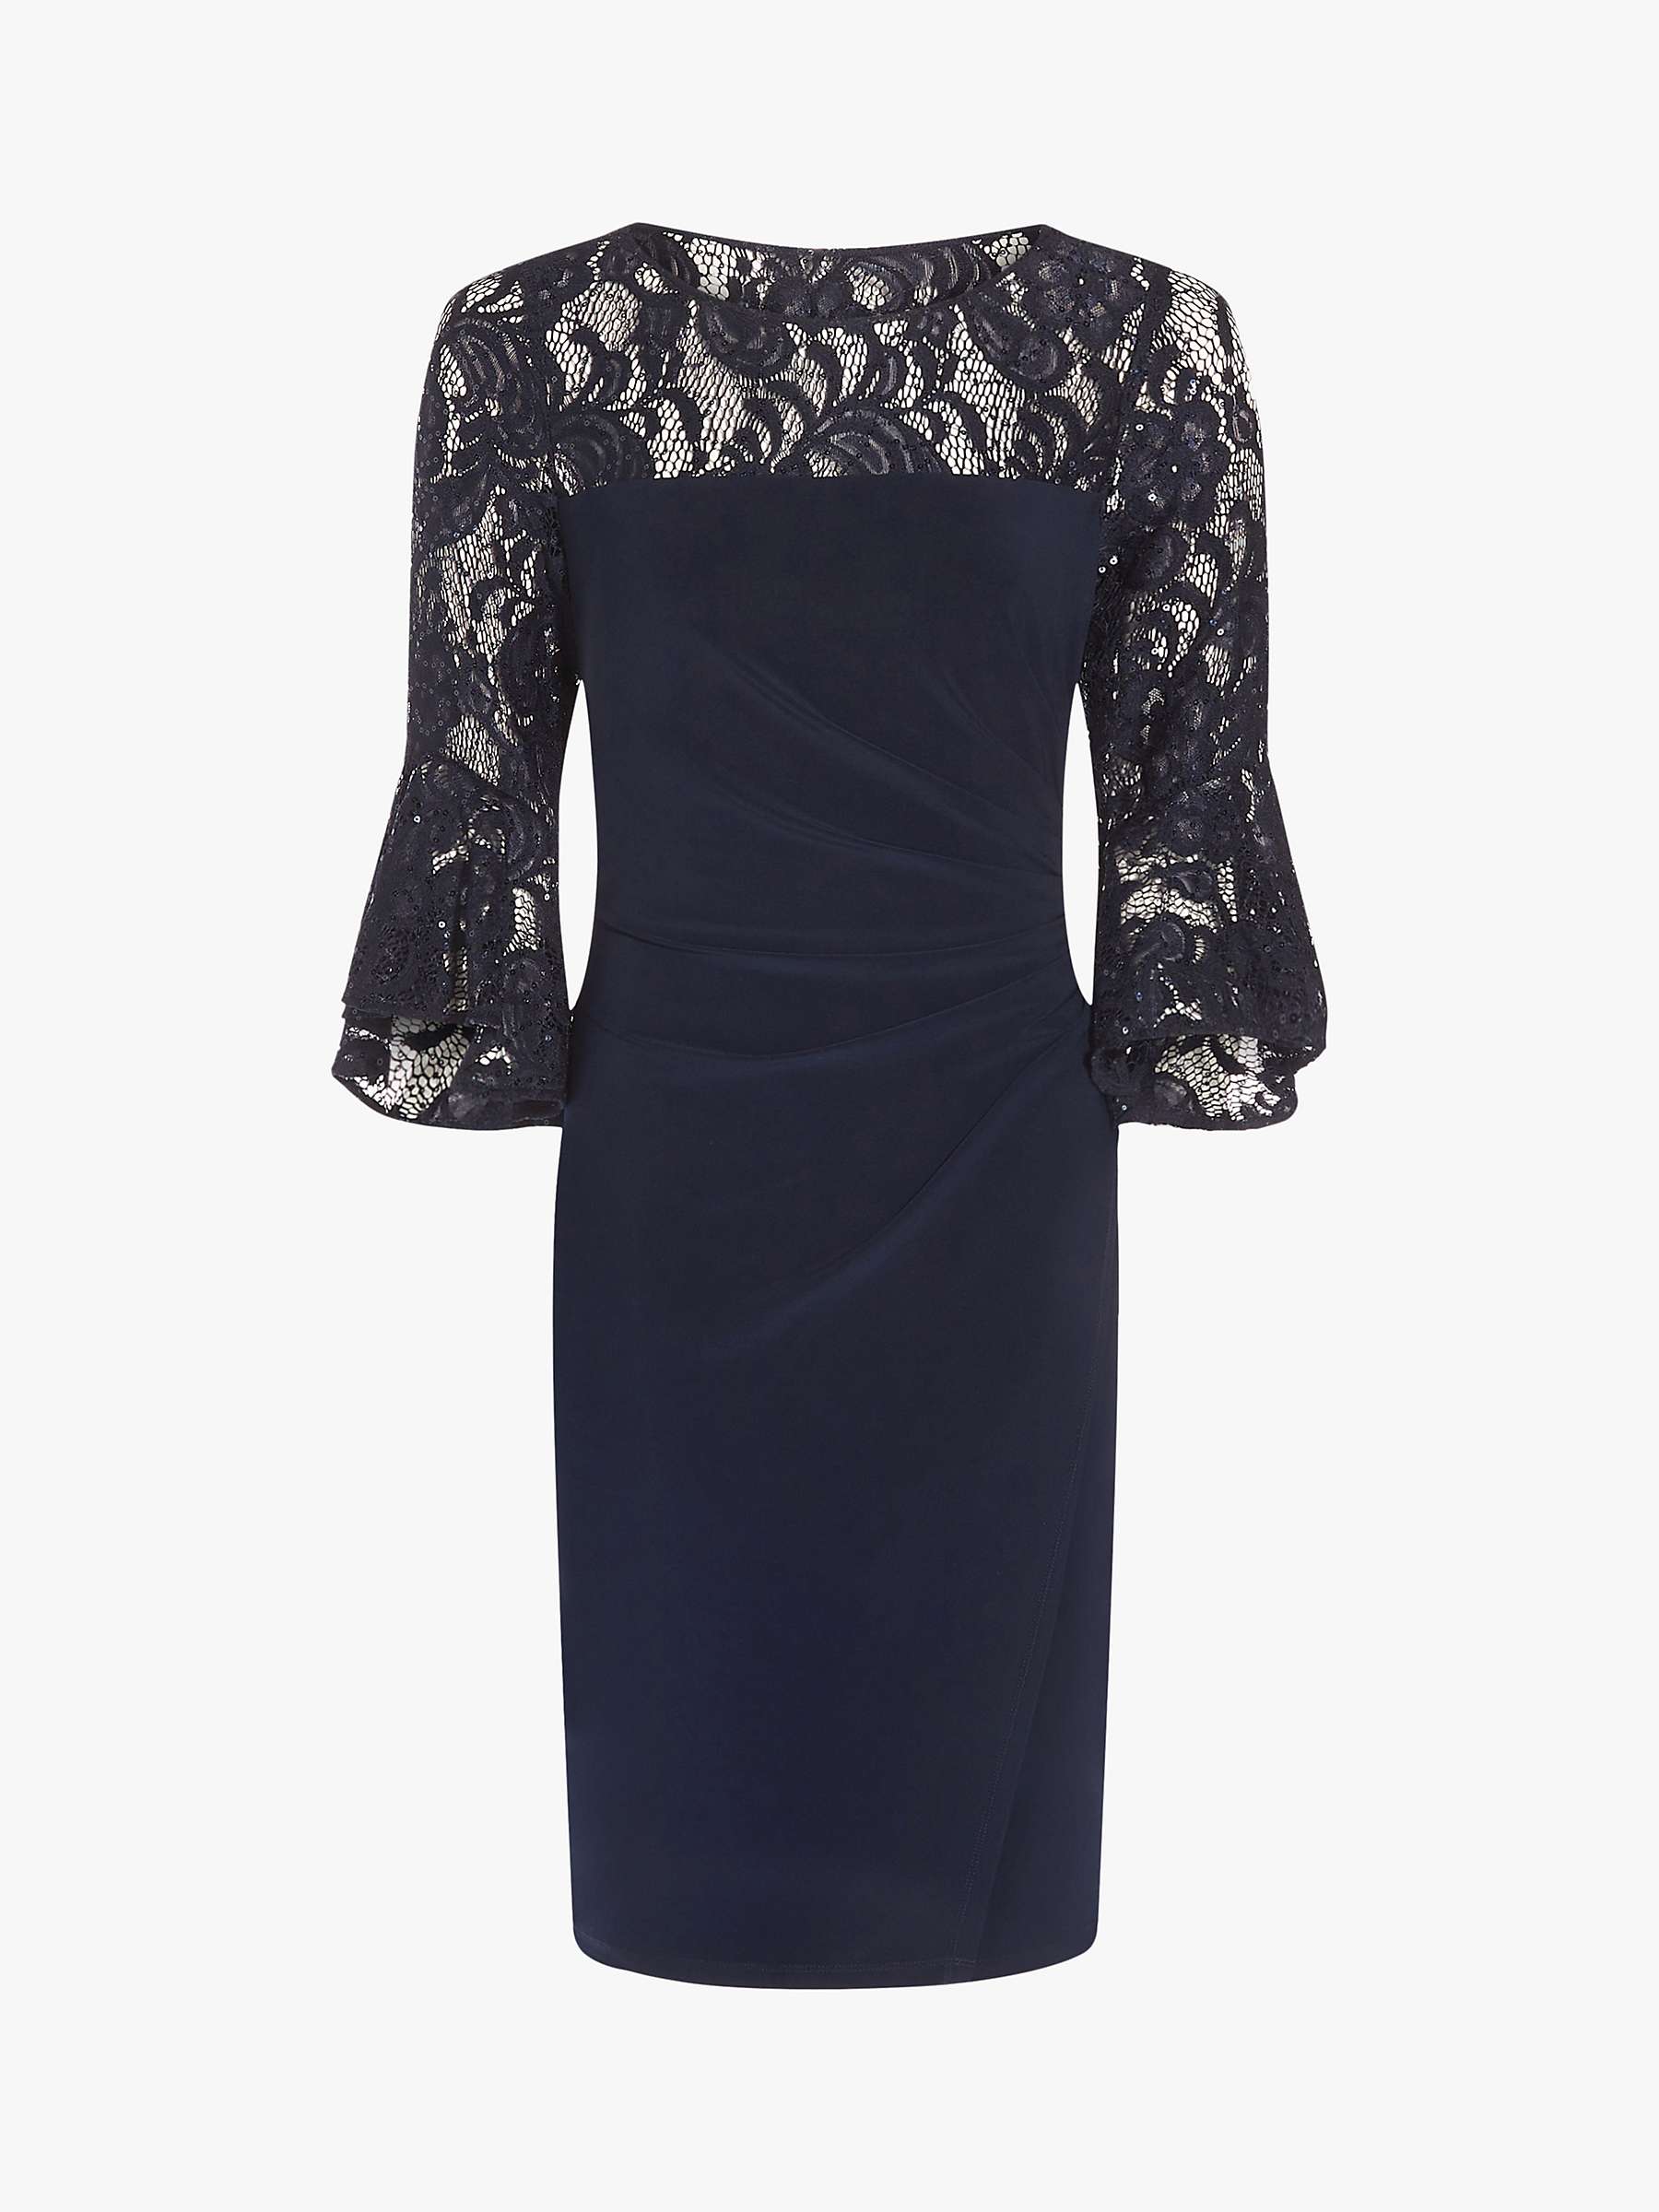 Buy Adrianna Papell Lace Jersey Knee Length Sheath Dress, Midnight Blue Online at johnlewis.com